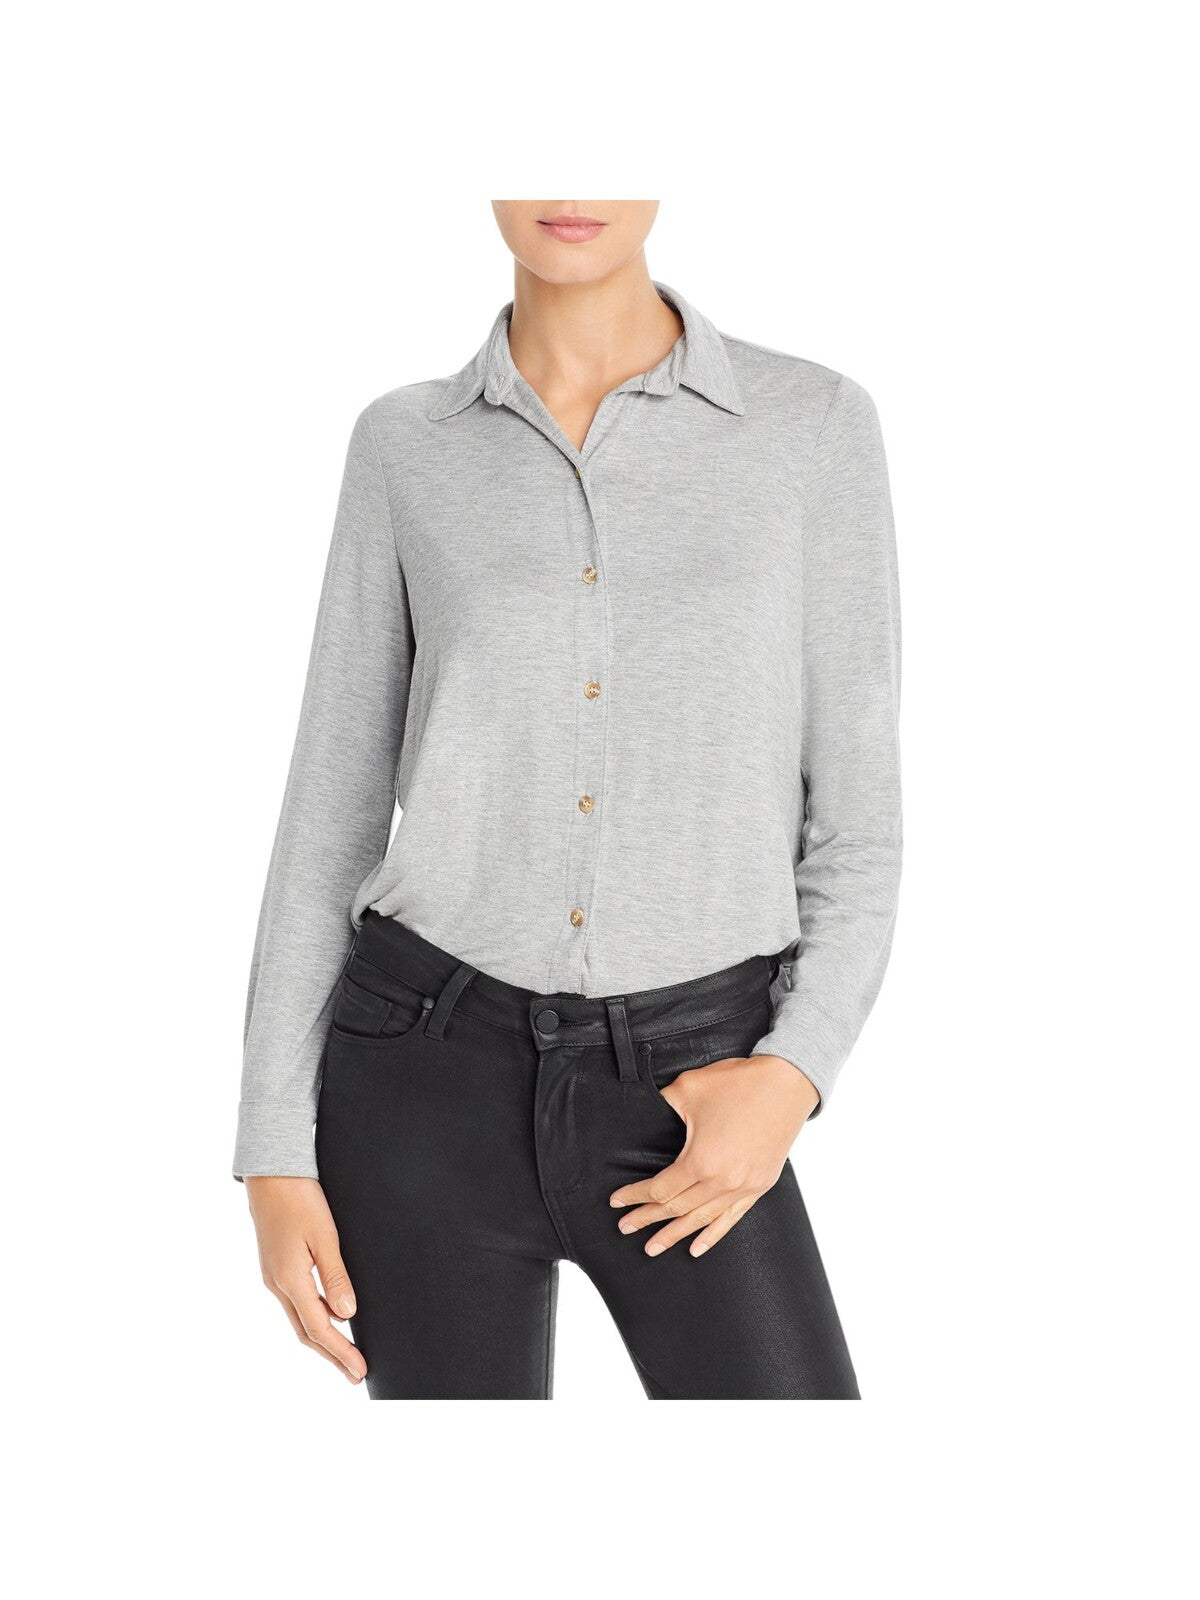 THREE DOTS Womens Gray Stretch Heather Long Sleeve Collared Button Up Top M